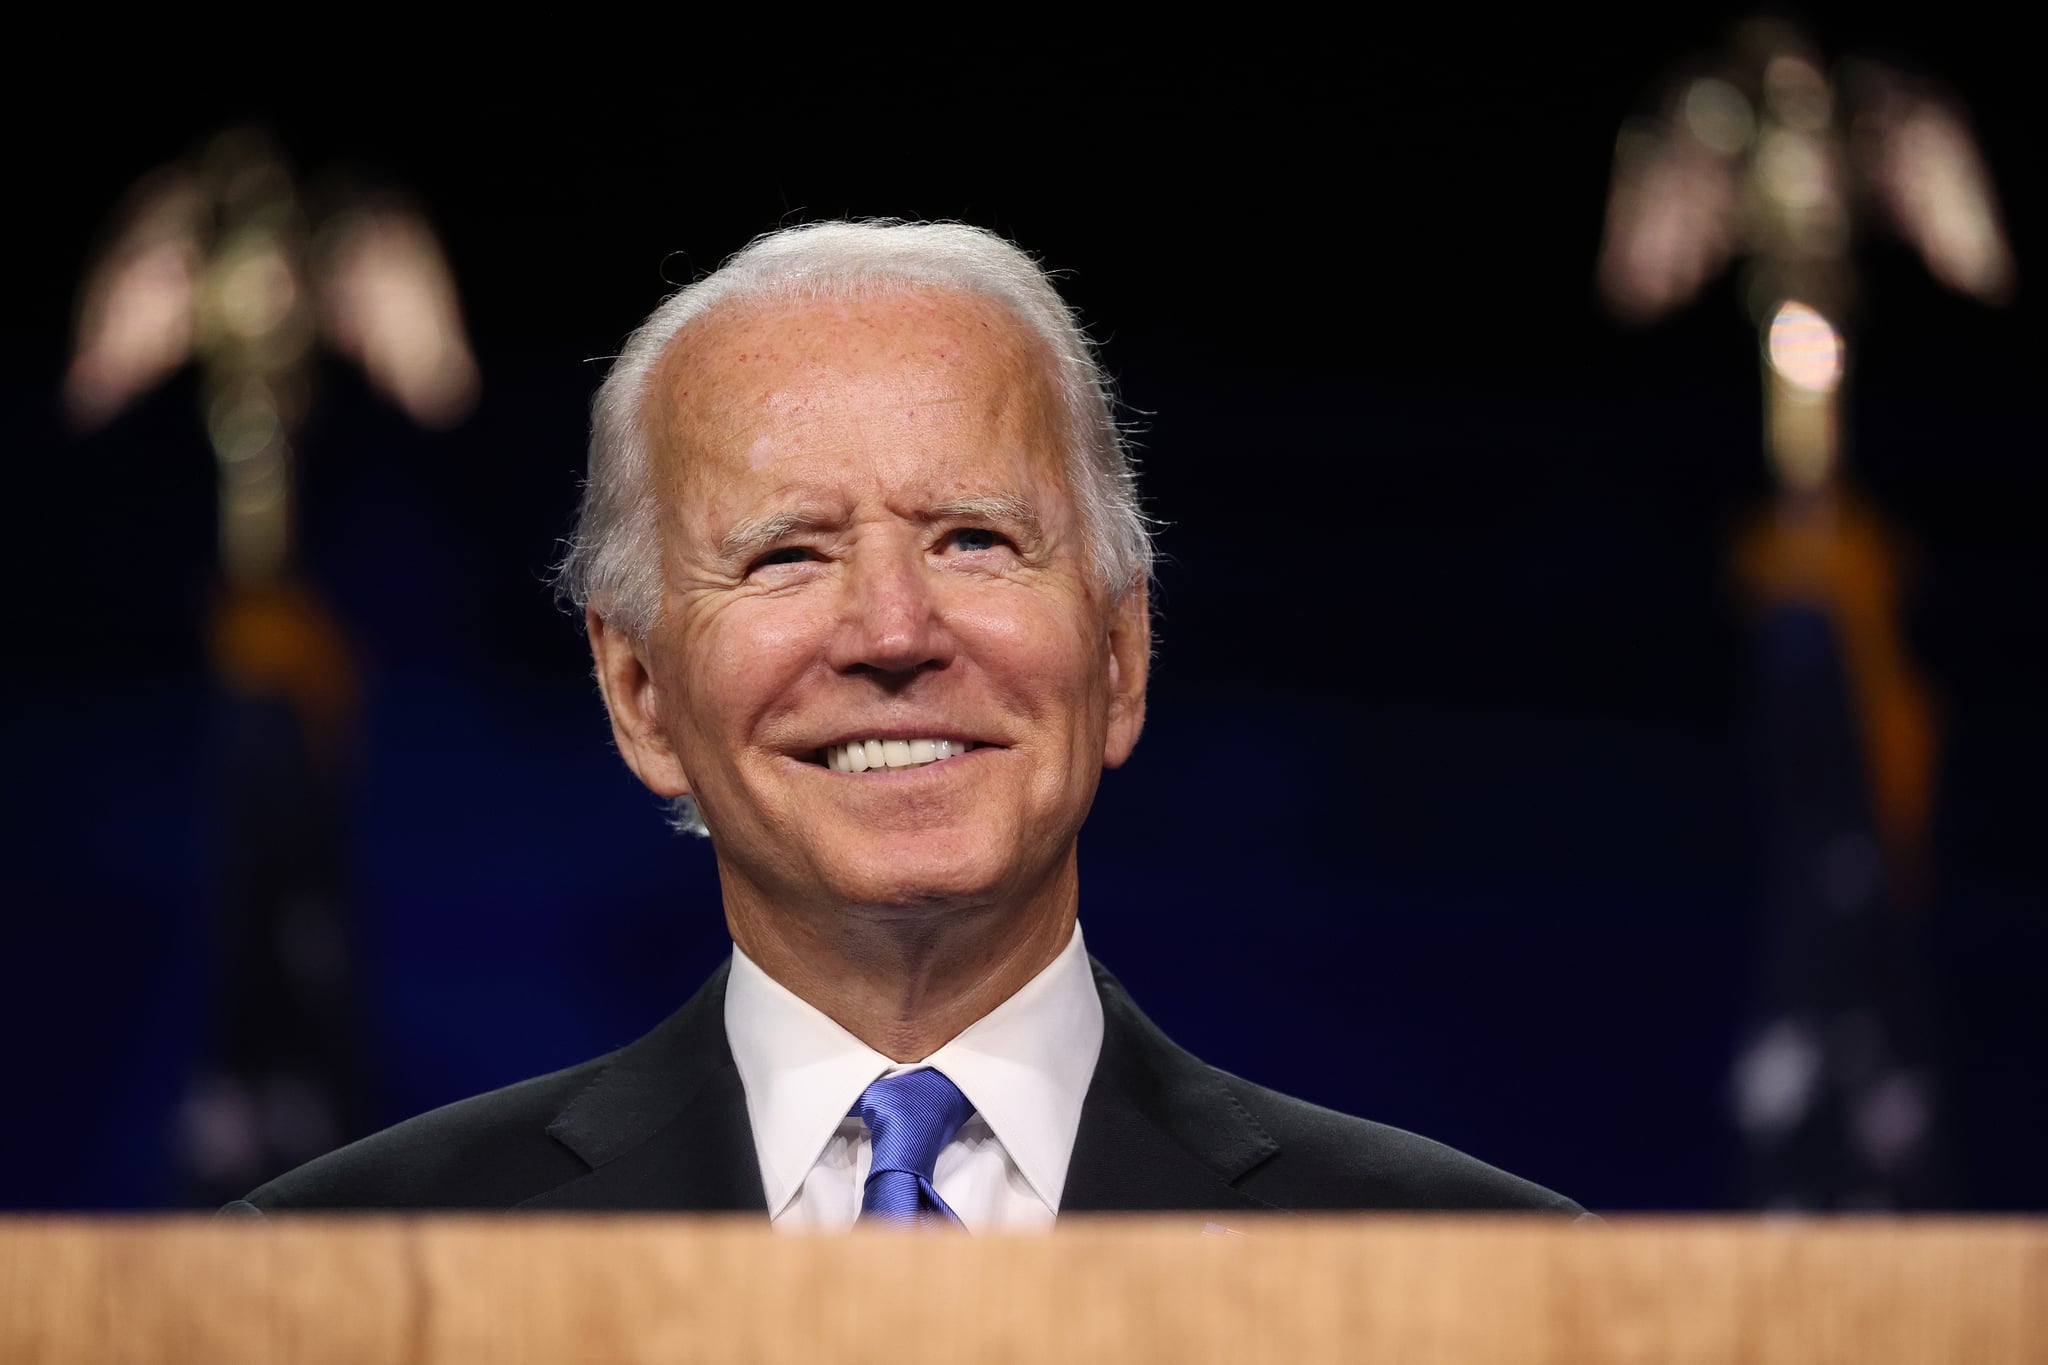 WILMINGTON, DELAWARE - AUGUST 20: Democratic presidential nominee Joe Biden delivers his acceptance speech on the fourth night of the Democratic National Convention from the Chase Center on August 20, 2020 in Wilmington, Delaware. The convention, which was once expected to draw 50,000 people to Milwaukee, Wisconsin, is now taking place virtually due to the coronavirus pandemic. (Photo by Win McNamee/Getty Images)